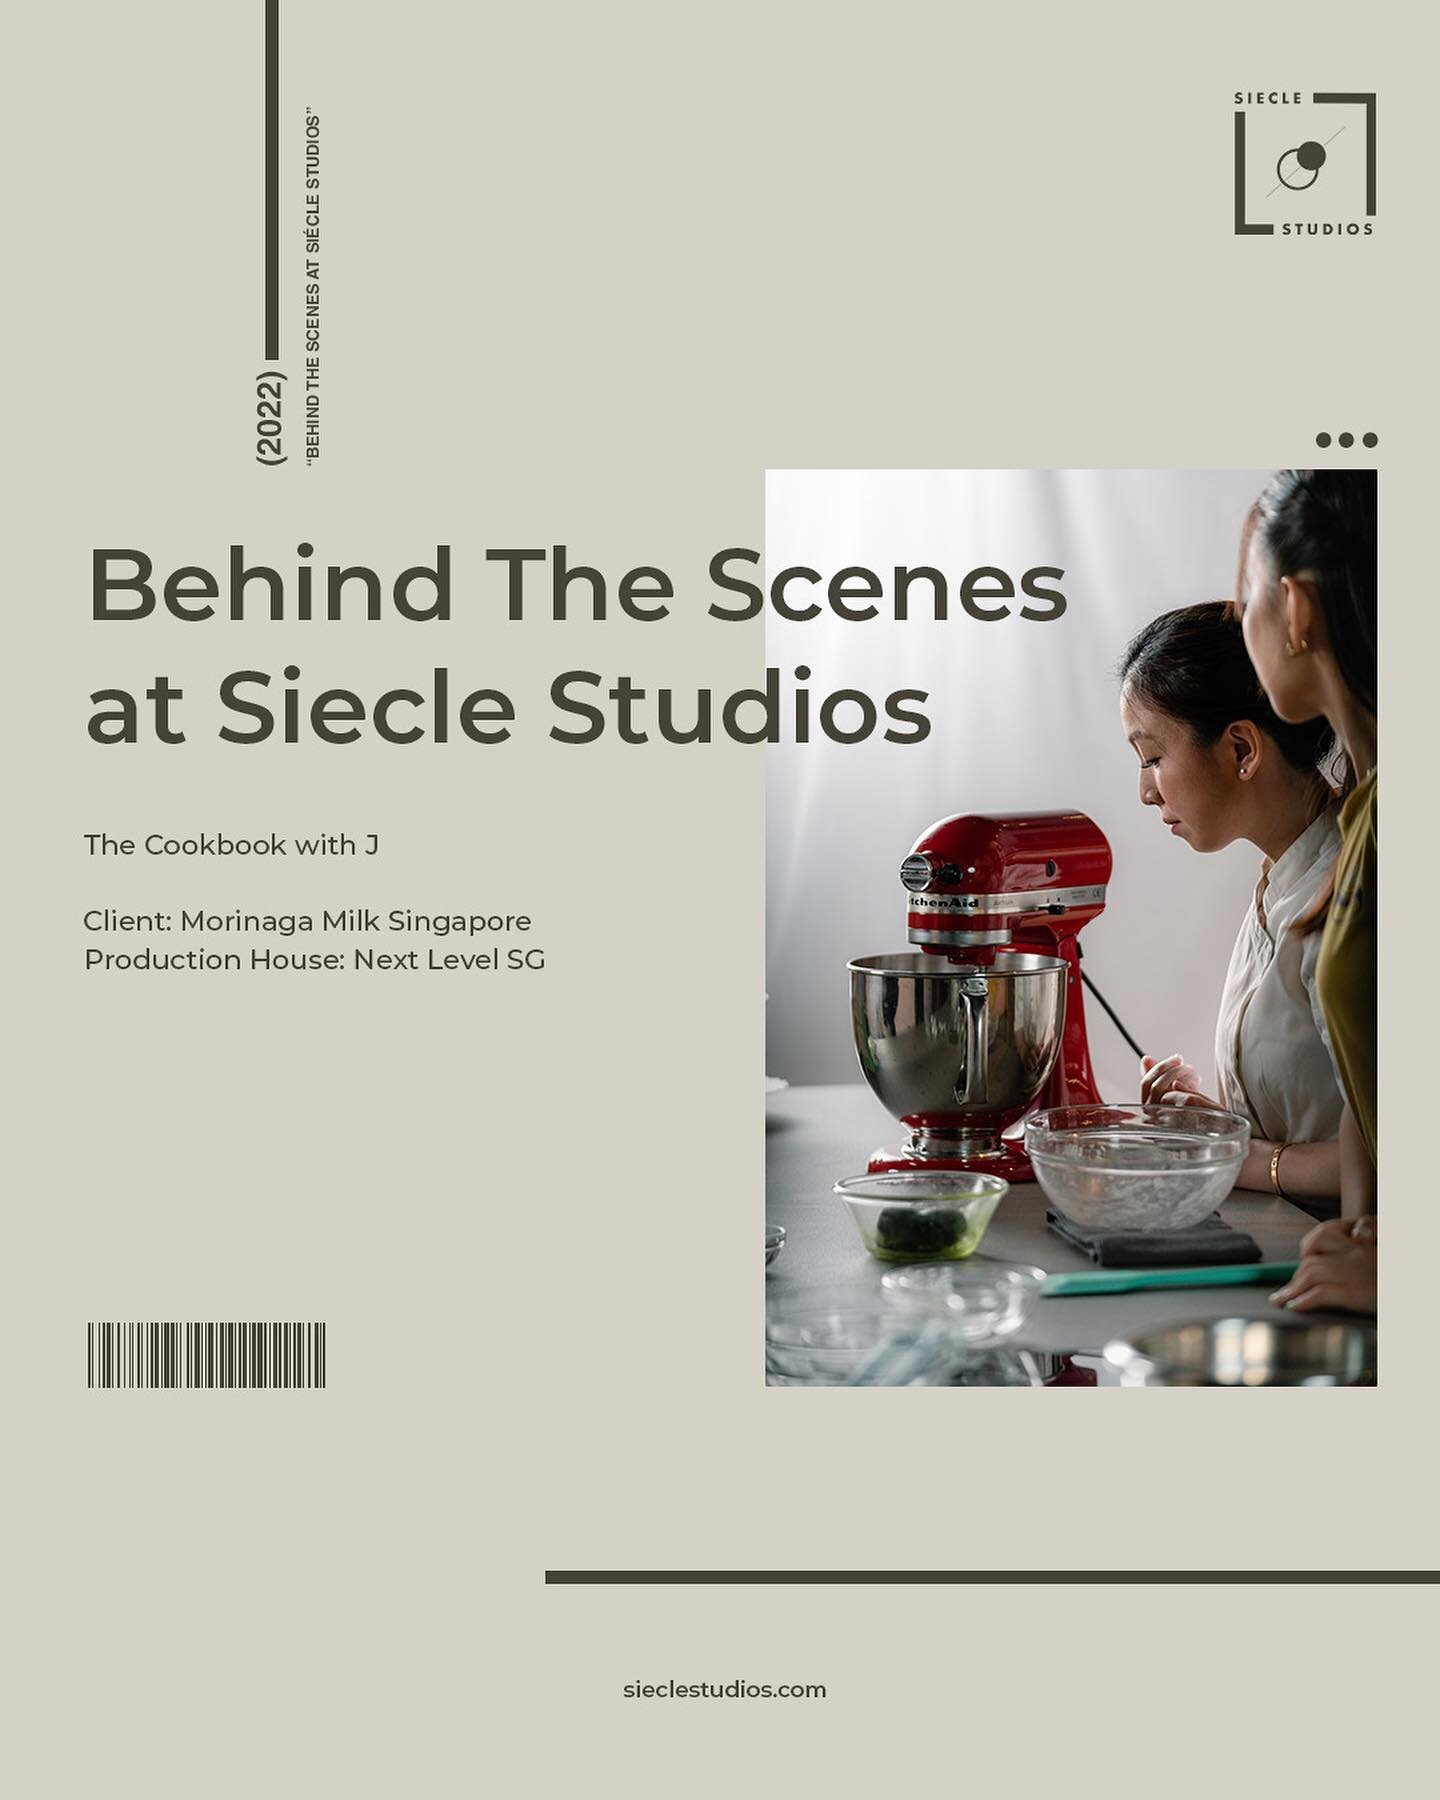 🎬 Take a look Behind The Scenes at @sieclestudios from The Cookbook with J produced by @nextlevel.sg in our kitchen studio! 

Our 5.6m fully functioning kitchen is equipped with all the necessary tools to aid you in fulfilling your creative visions 